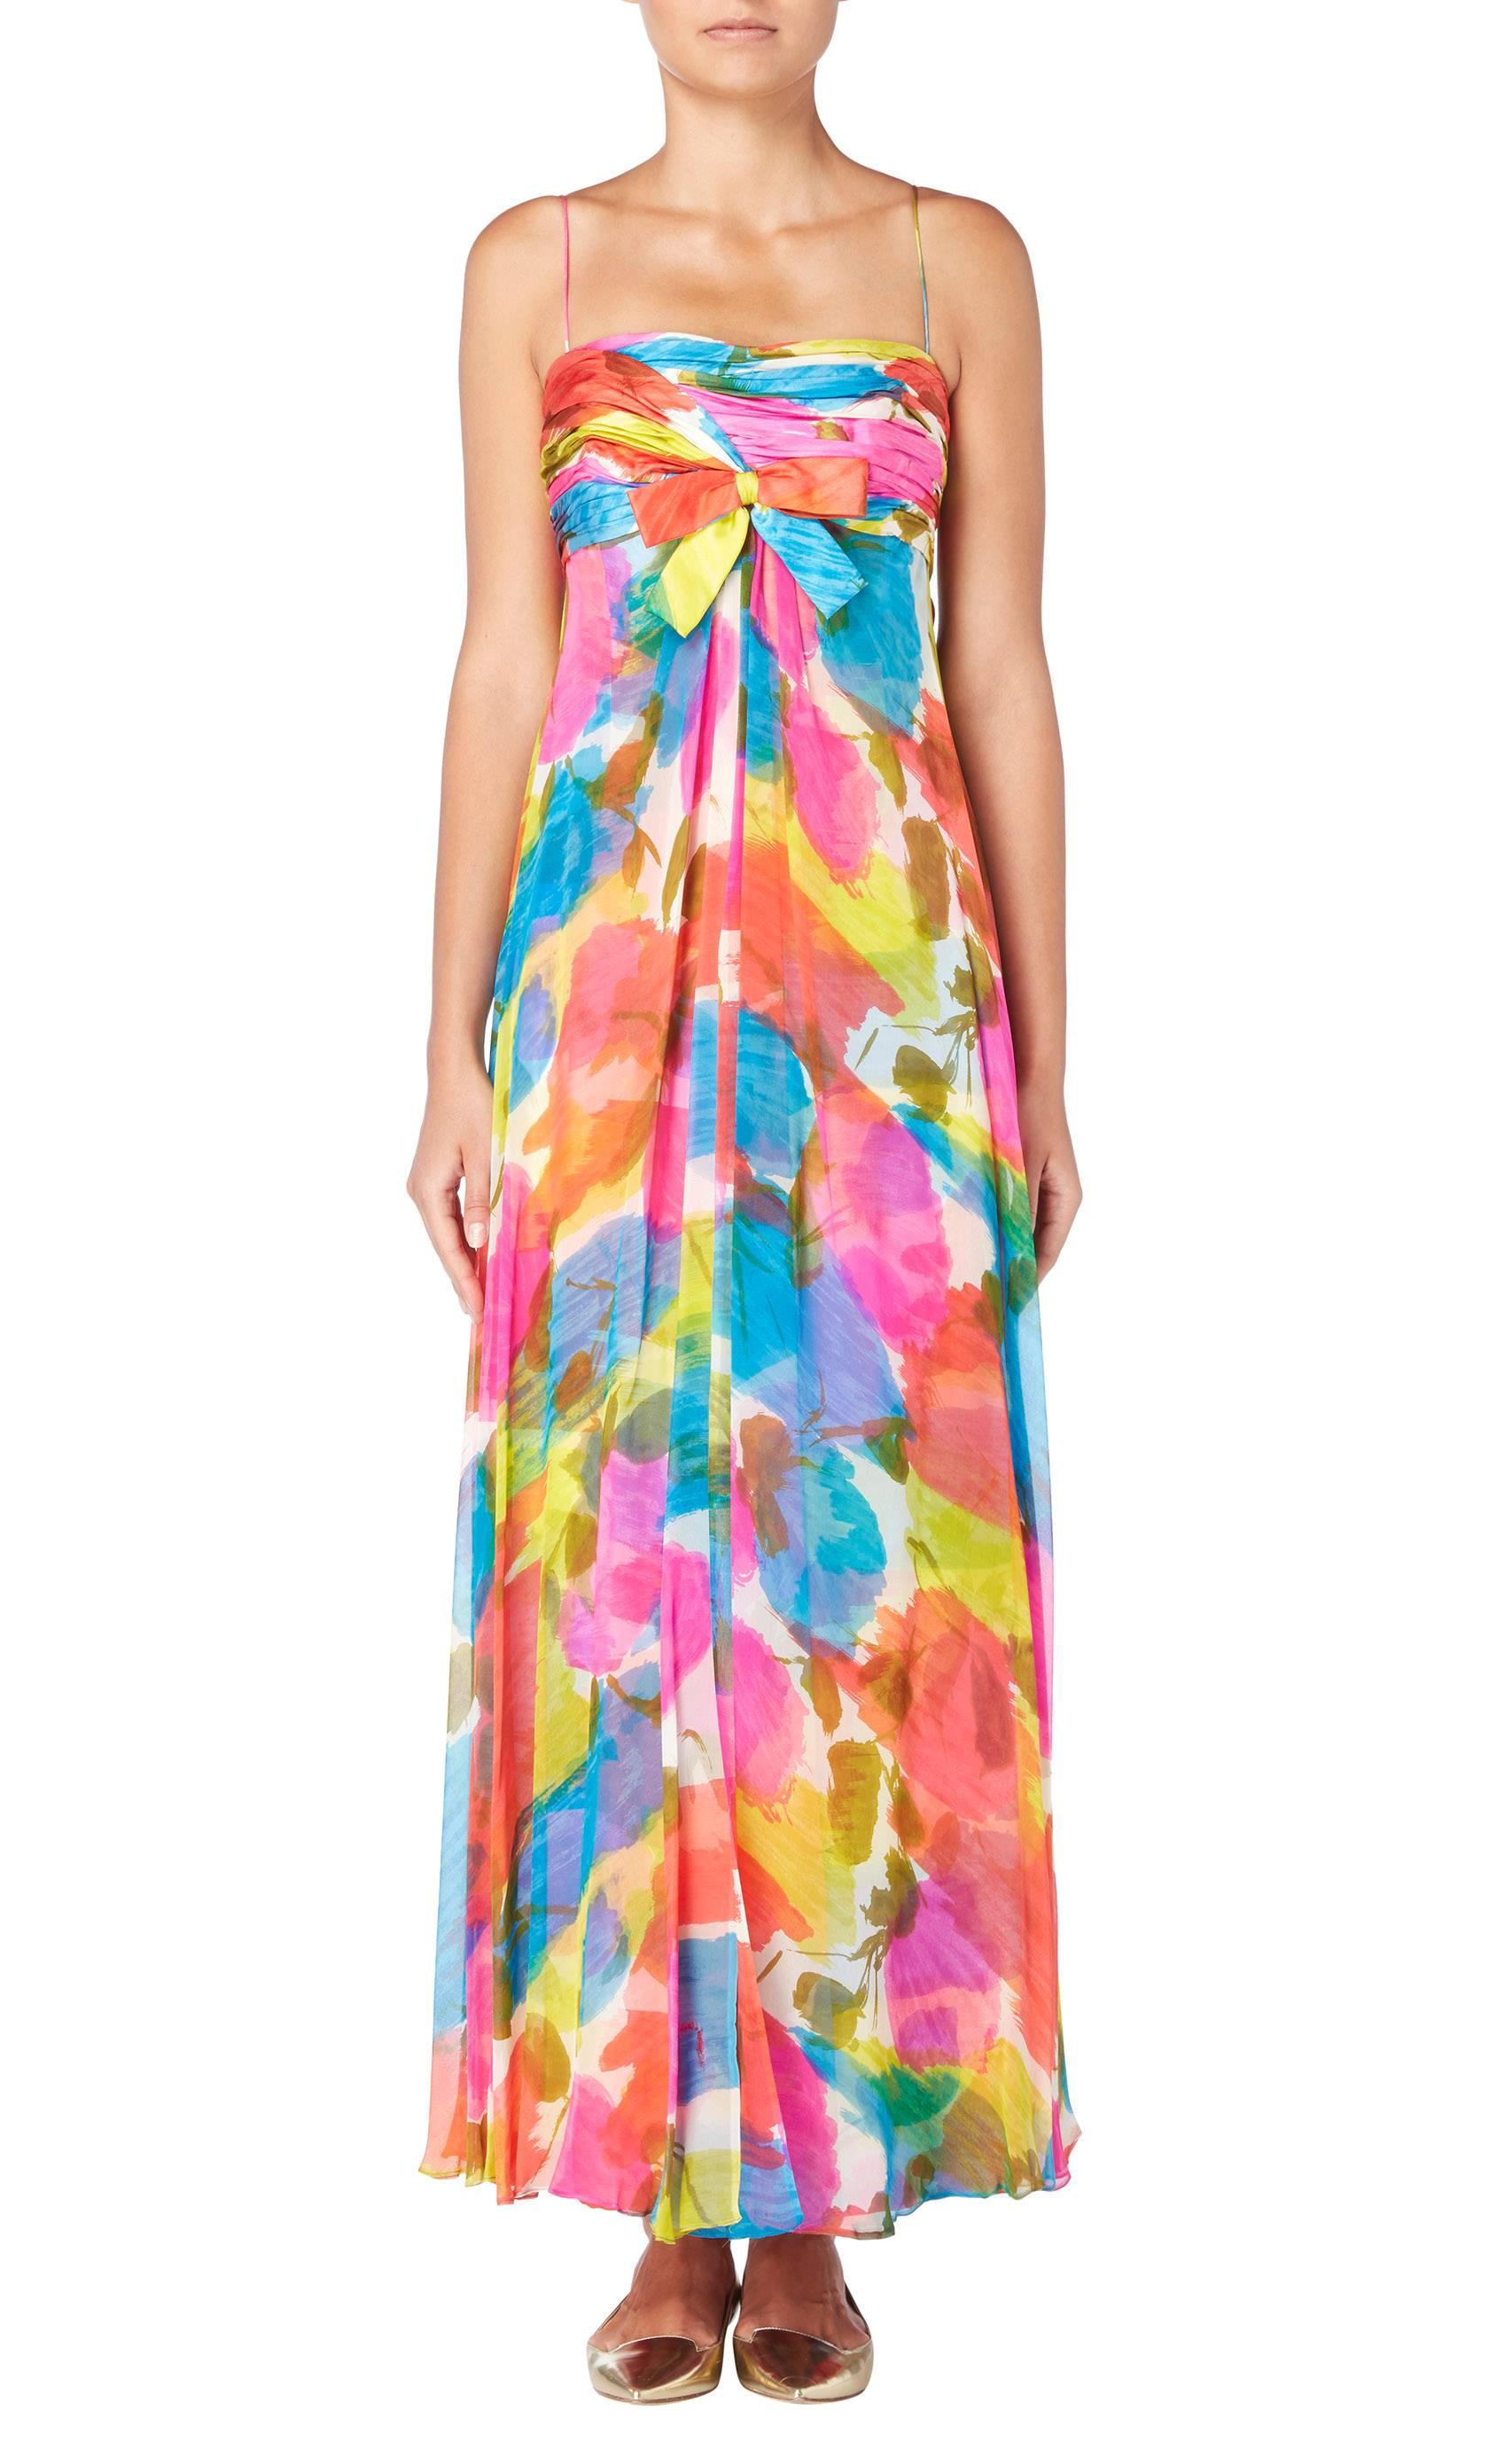 Ideal for summer cocktail parties and events, this Malcolm Starr multicoloured maxi dress is constructed from silk chiffon for a light and airy feel. Featuring spaghetti straps and gathering over the bust, the dress has a flattering empire waist